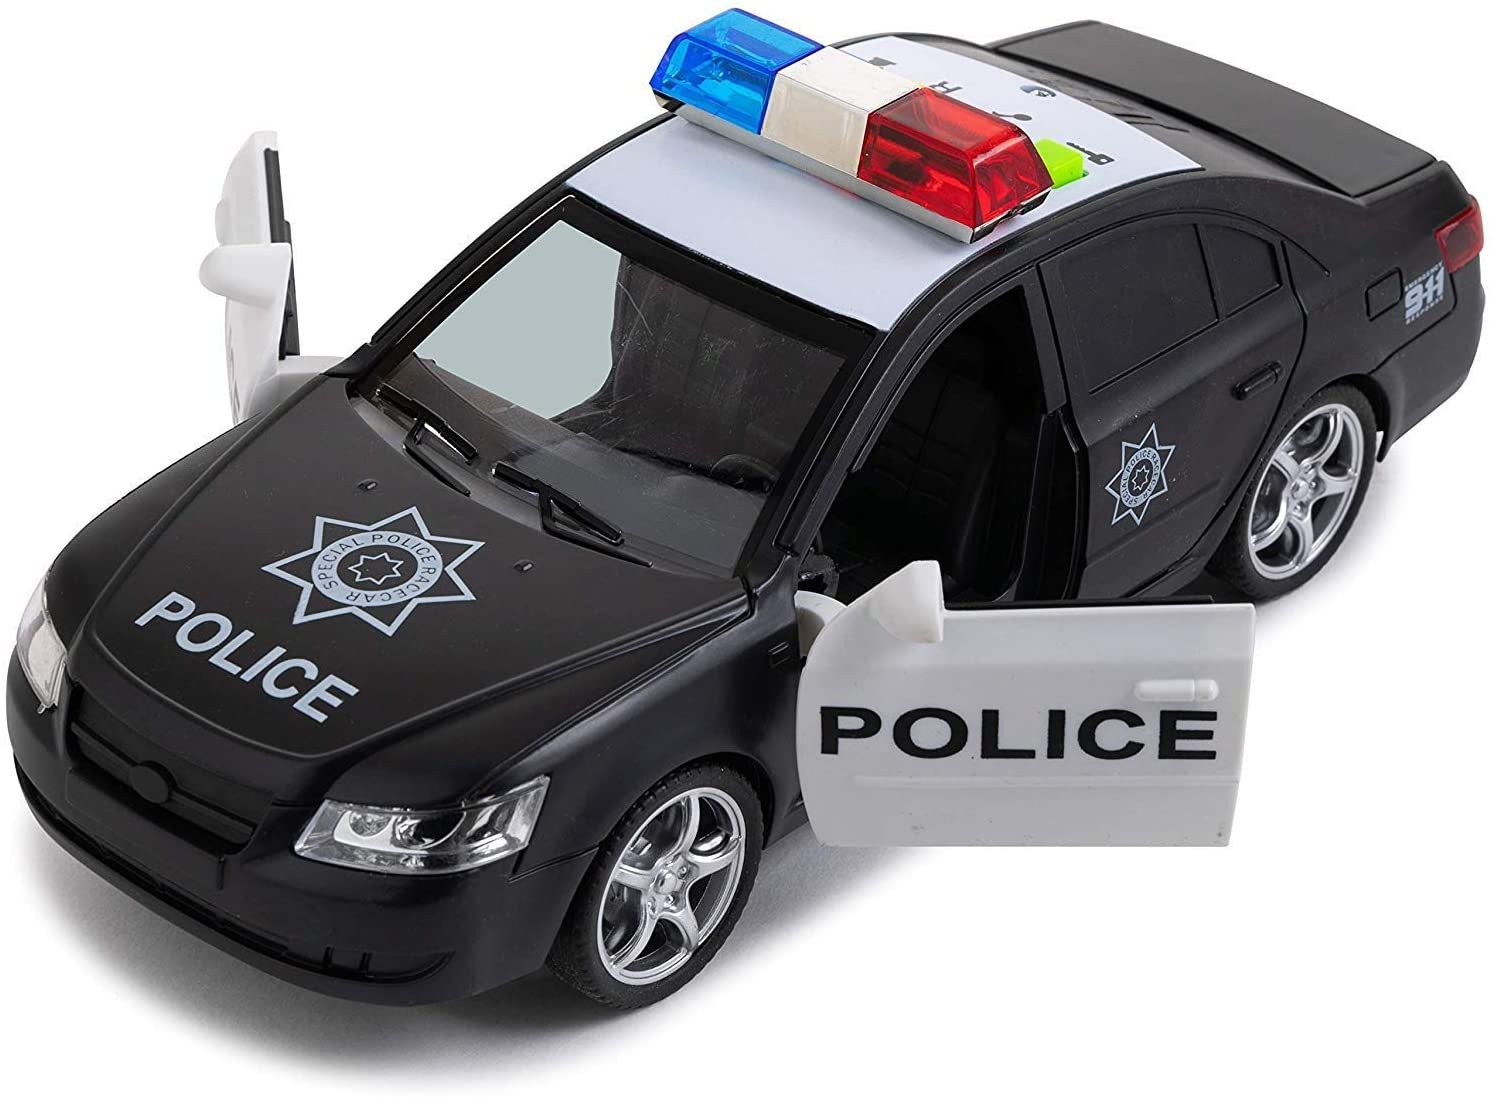 Toy To Enjoy Friction Powered Police Car with Light & Sounds - Heavy Duty Plastic Vehicle Toy for Kids & Children - Openable Doors, Detailed Interior